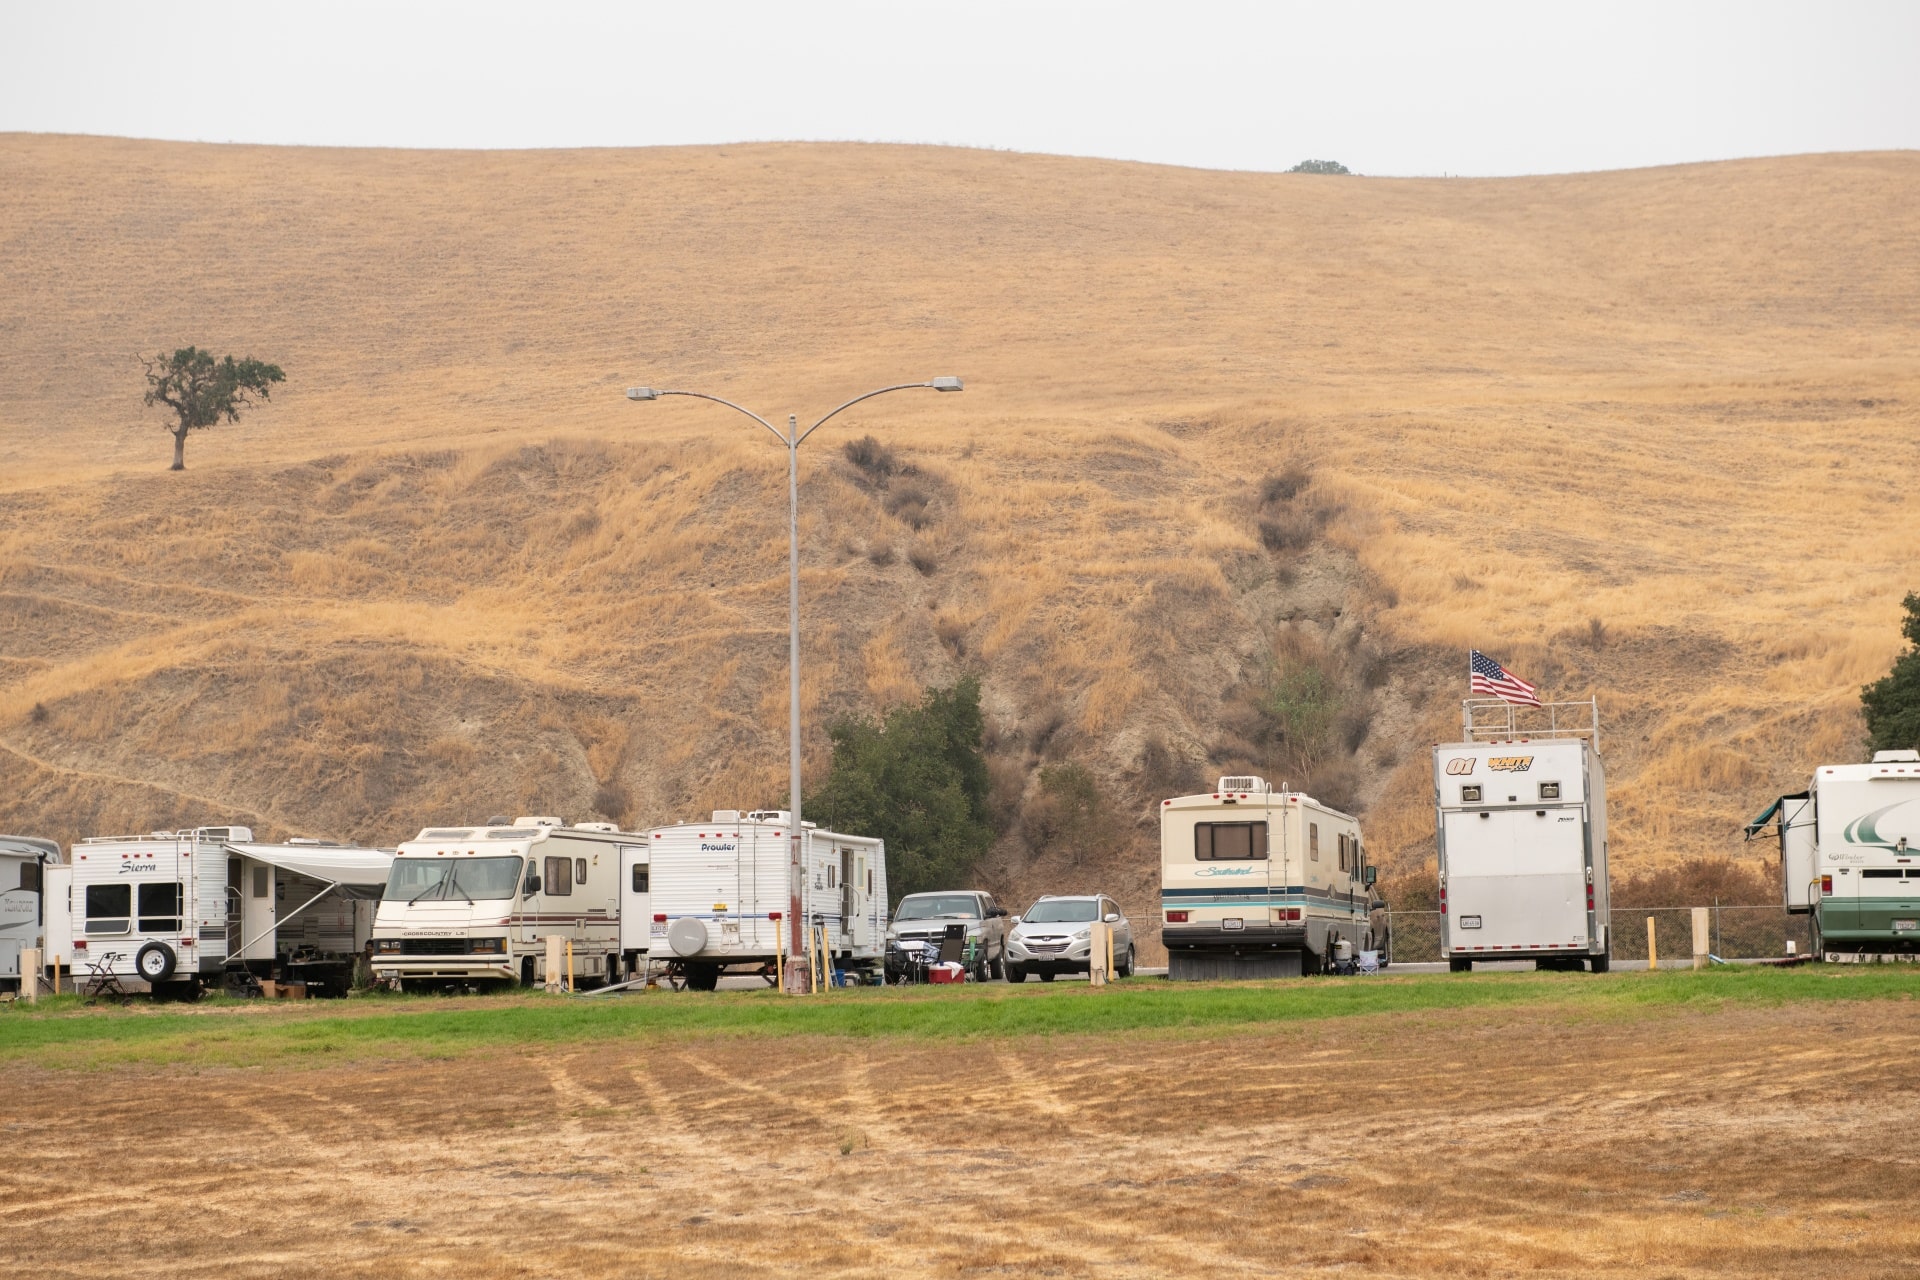 Row of recreational vehicles parked together at Bolado Park, San Benito County